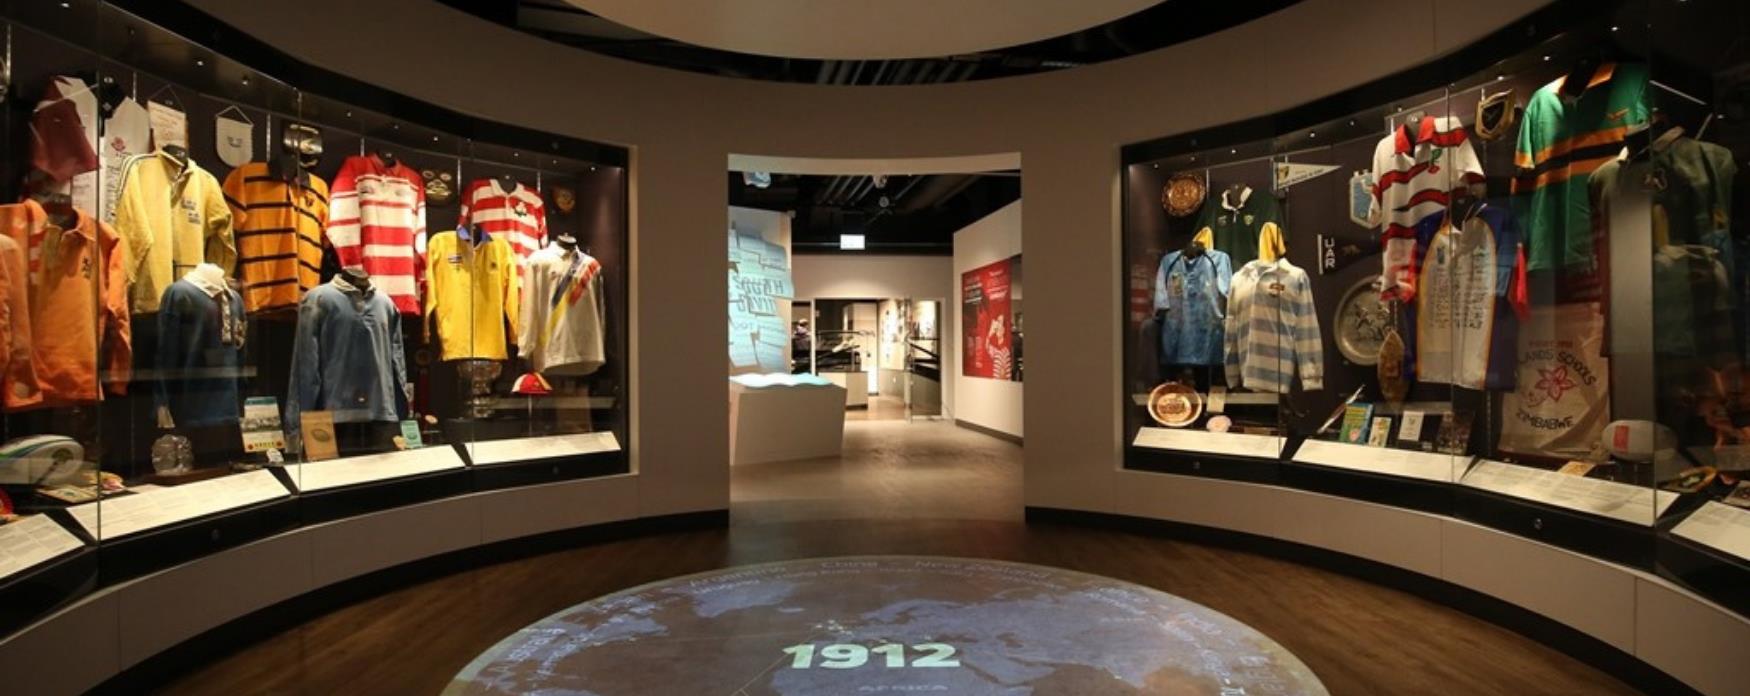 World Rugby Museum interior picture